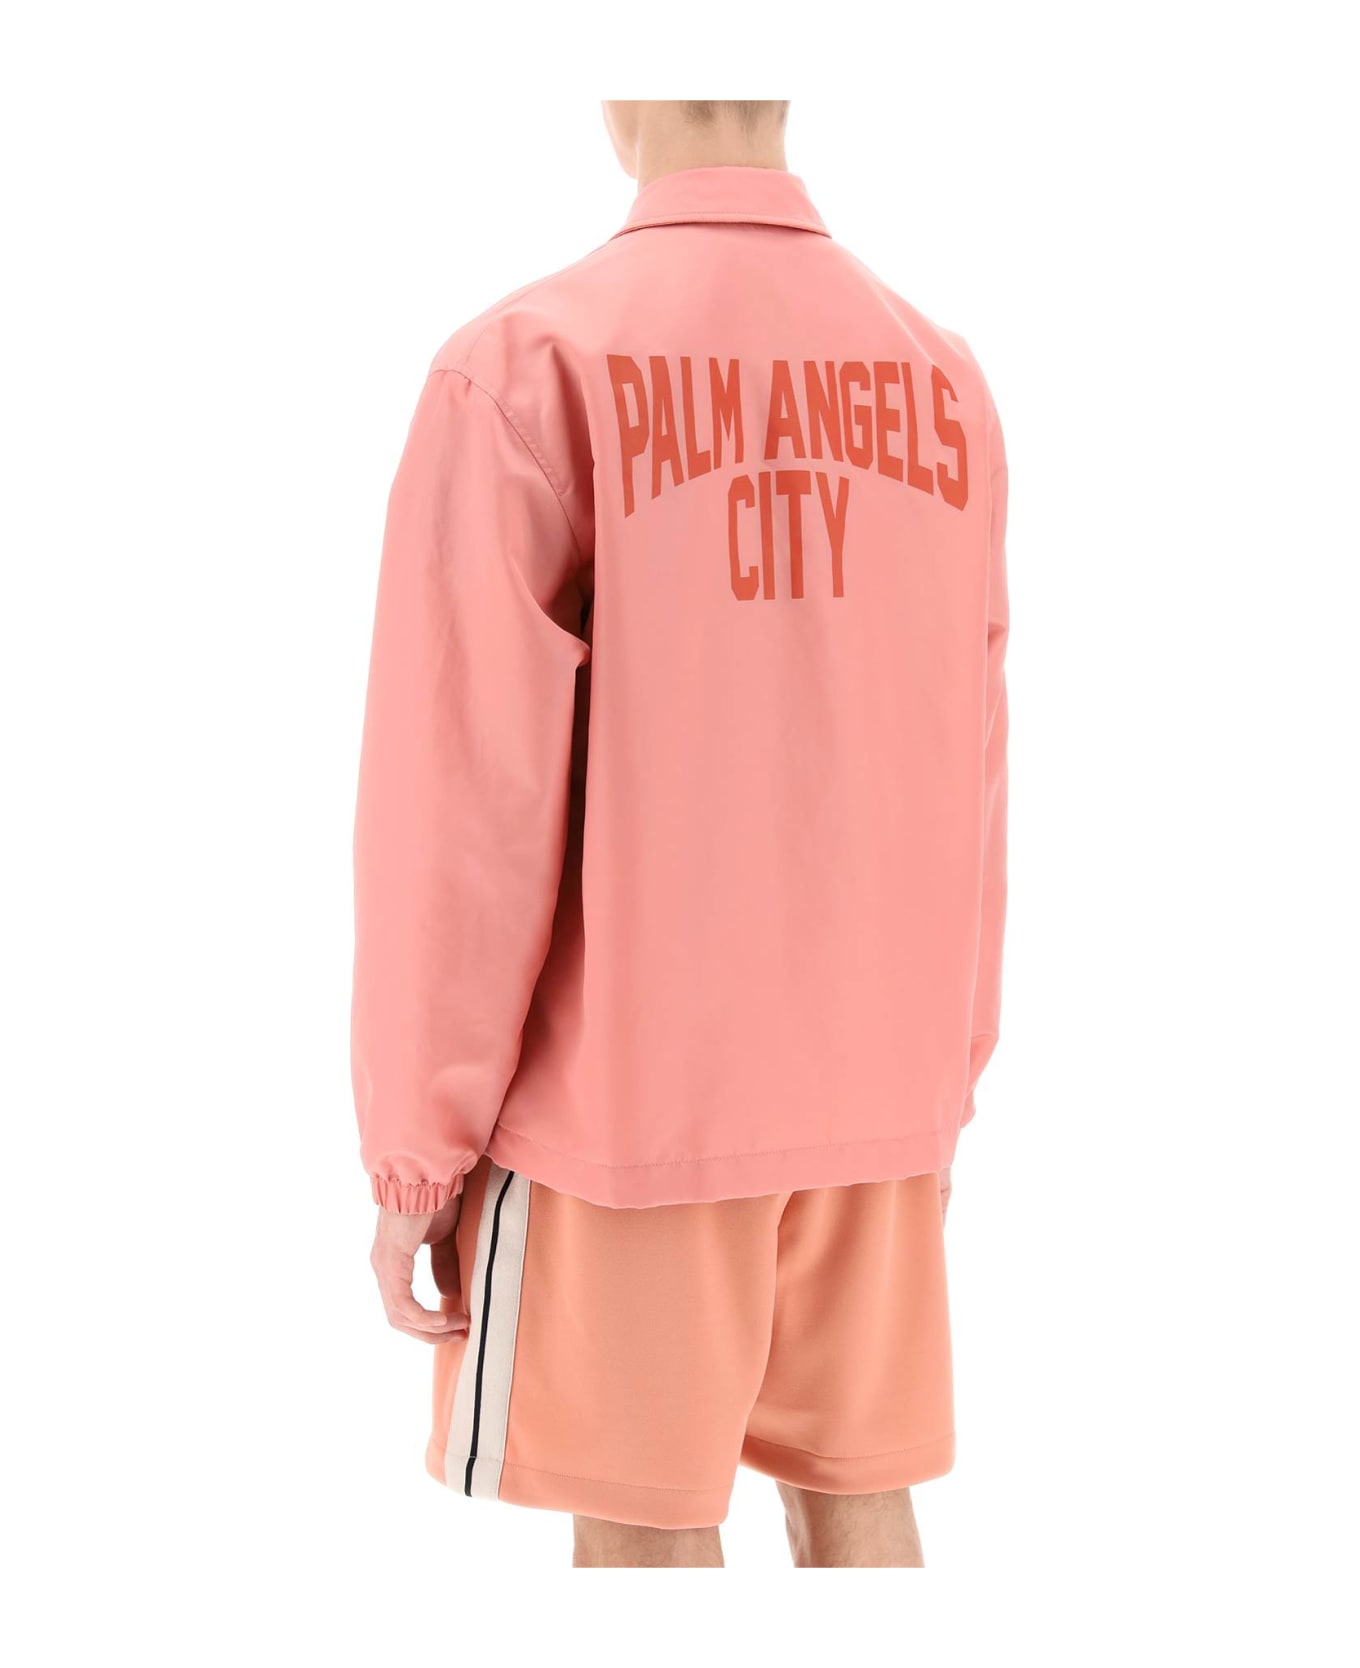 Palm Angels Pa City Coach Jacket - PINK RED (Pink) ジャケット